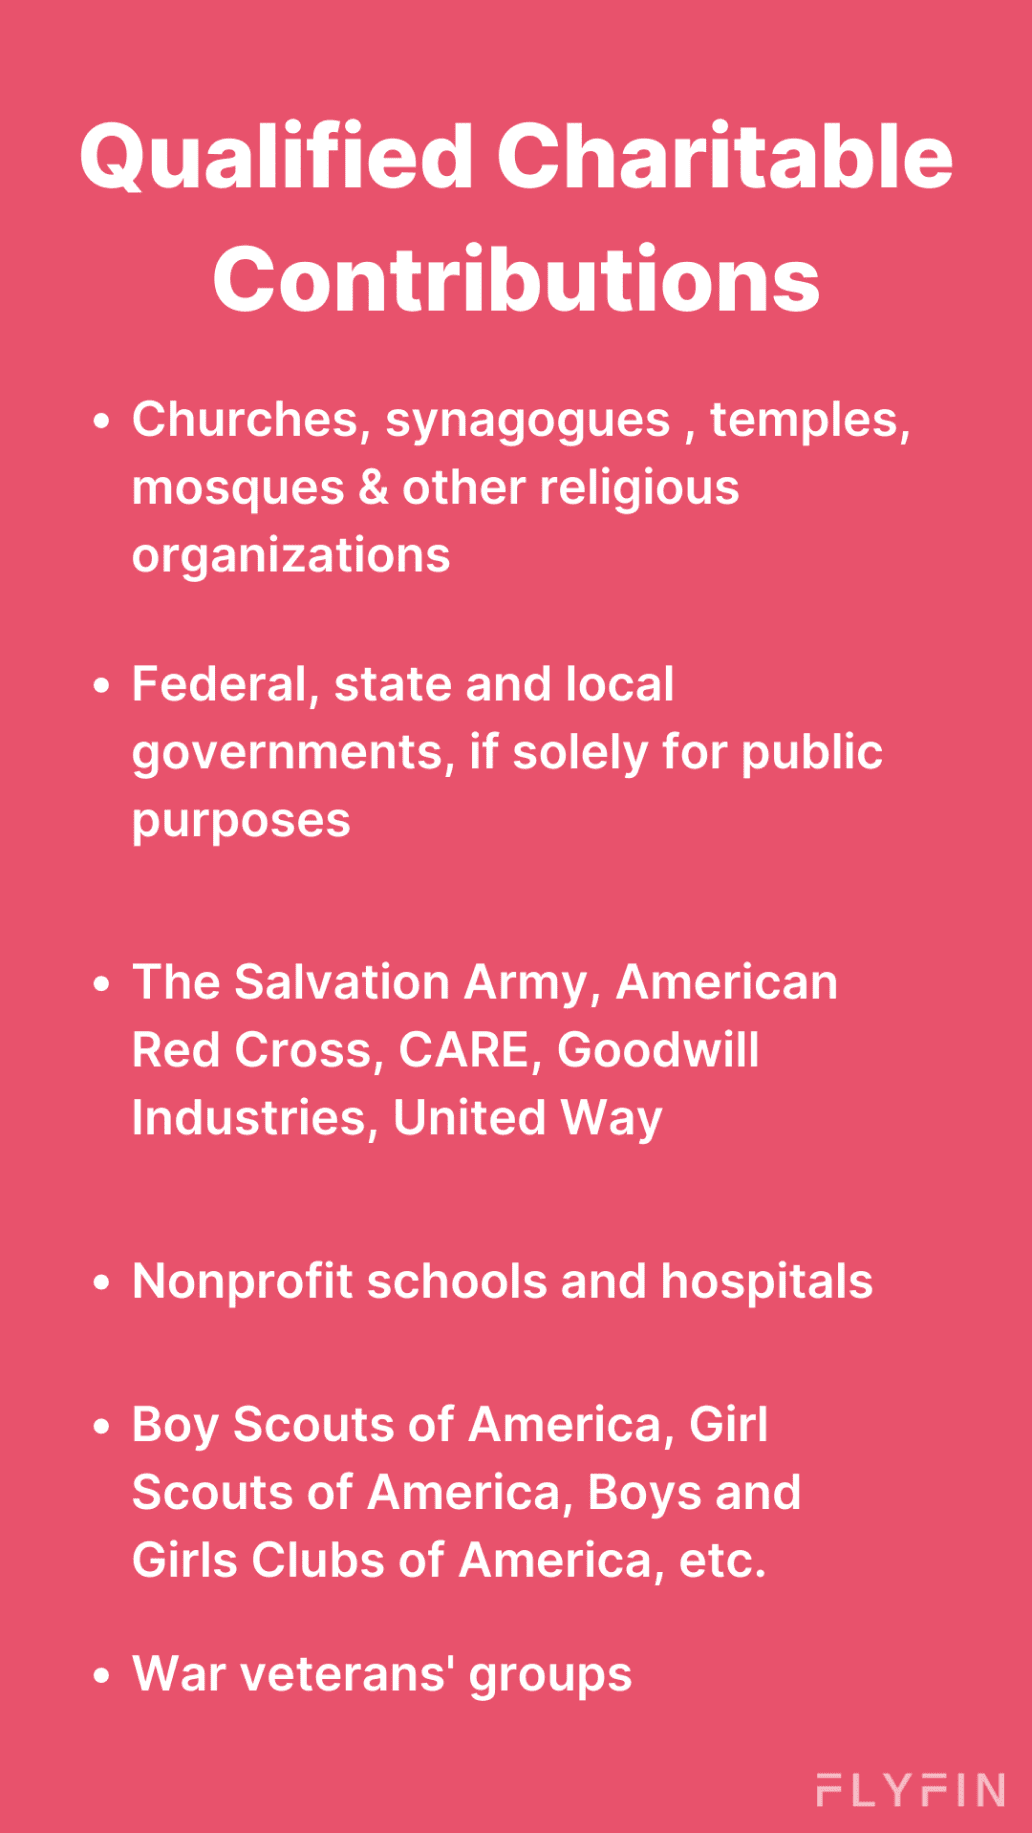 List of qualified charitable contributions including religious organizations, nonprofits, schools, hospitals, and veteran groups for tax deductions. No mention of self-employed, 1099, or freelancer.